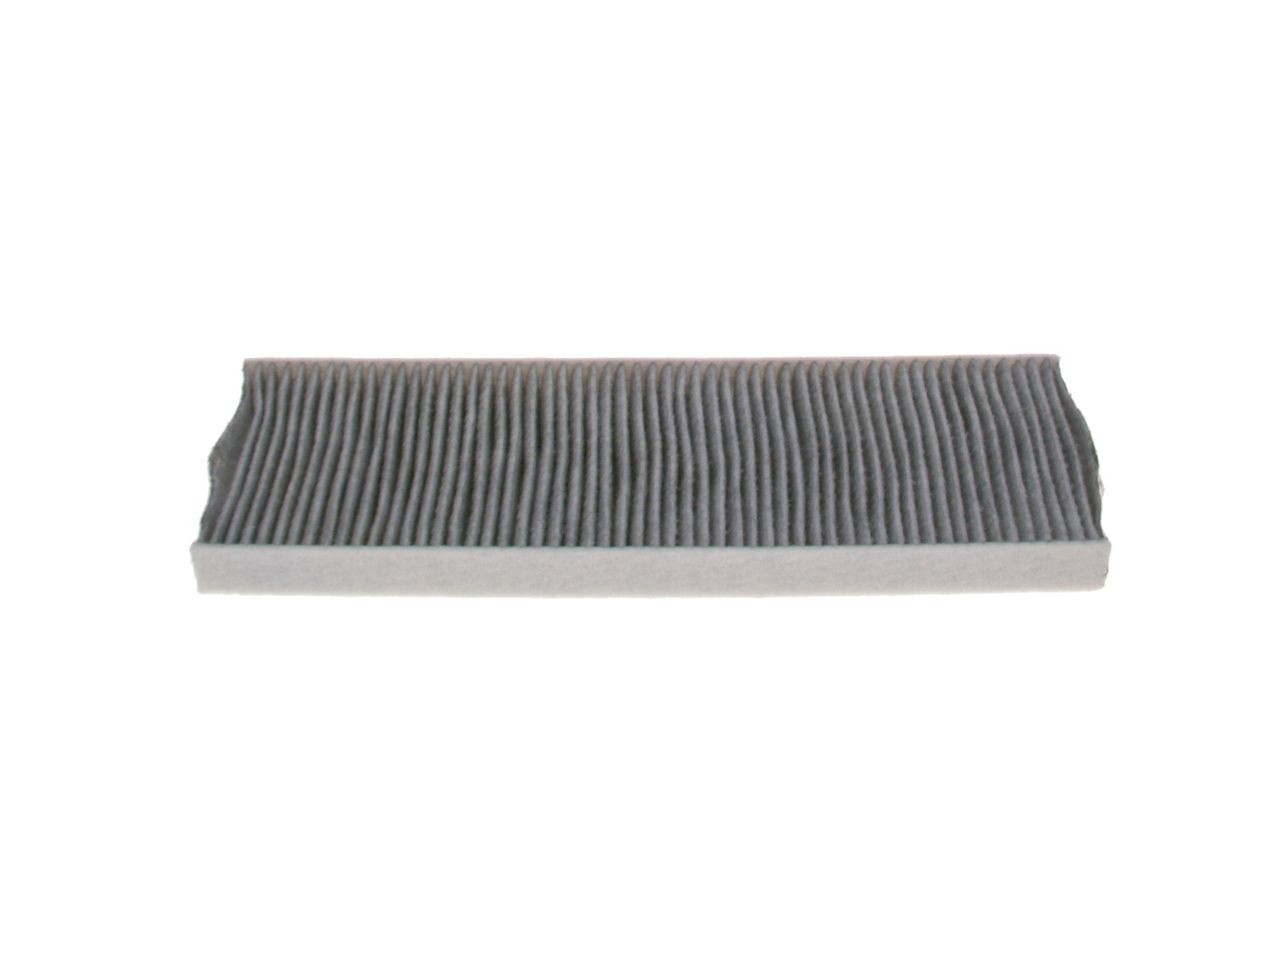 BOSCH 1987435606 Air conditioner filter Activated Carbon Filter, 448 mm x 151 mm x 31 mm